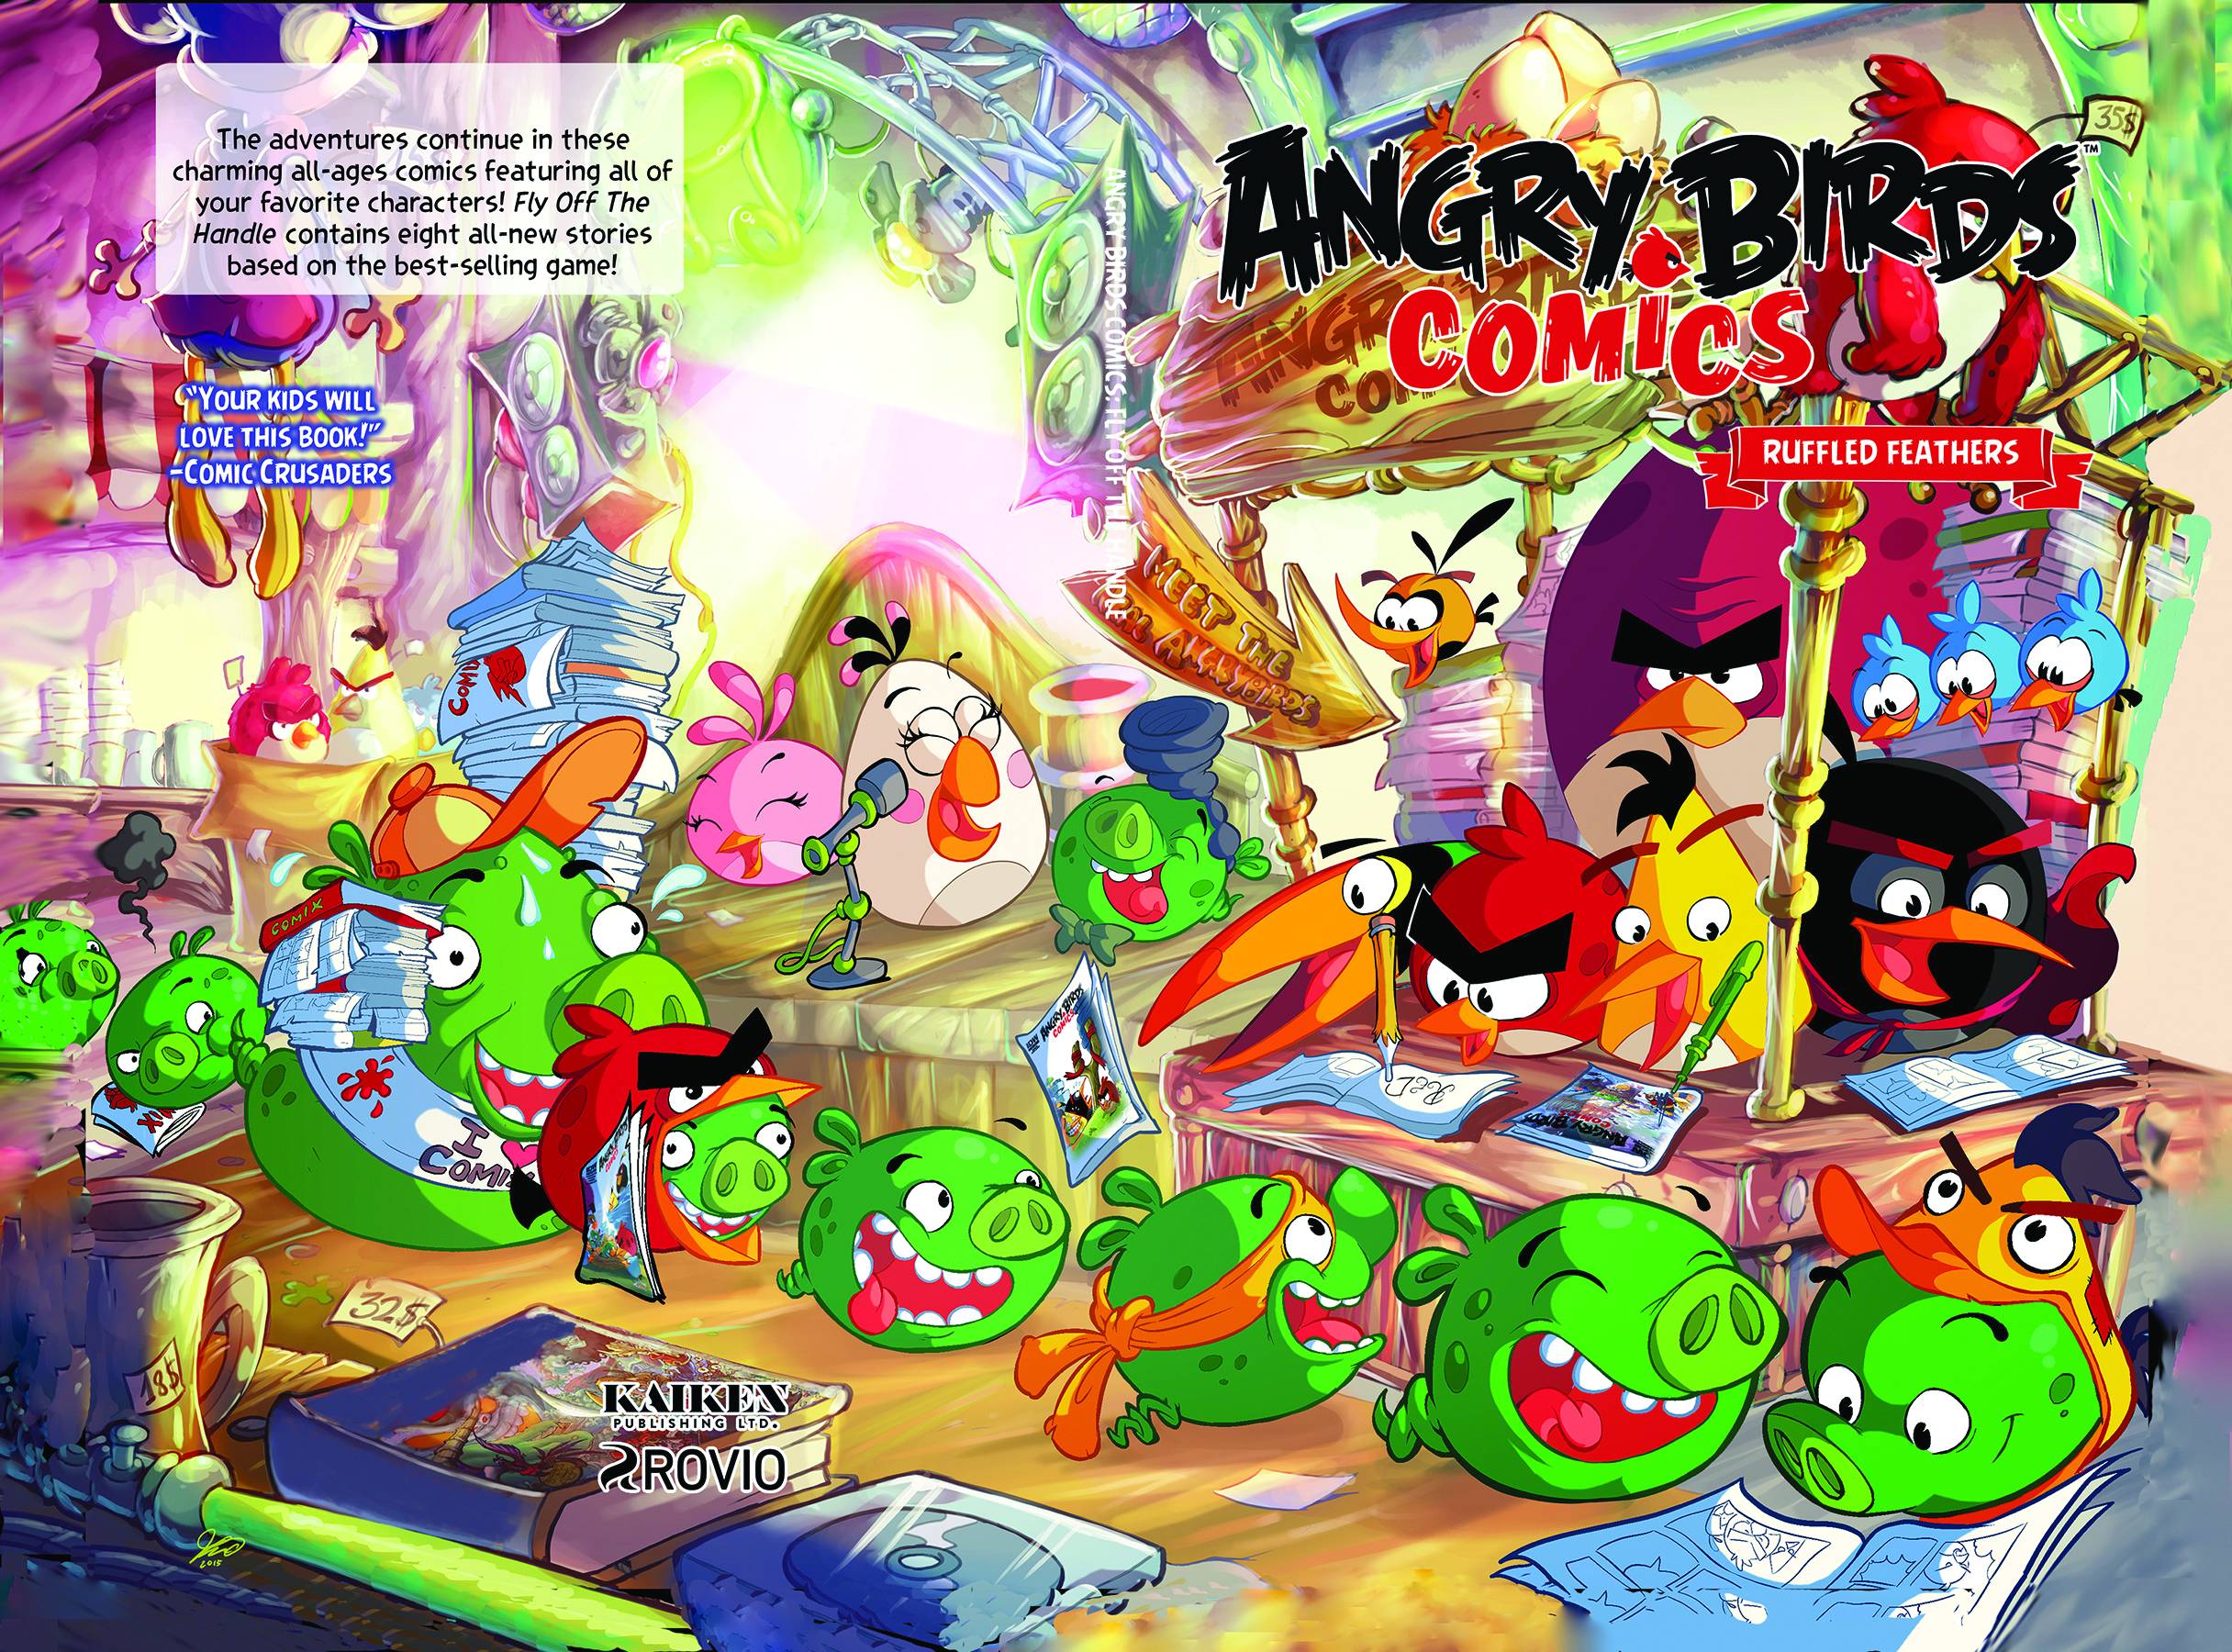 Angry Birds Hardcover Volume 5 Ruffled Feathers